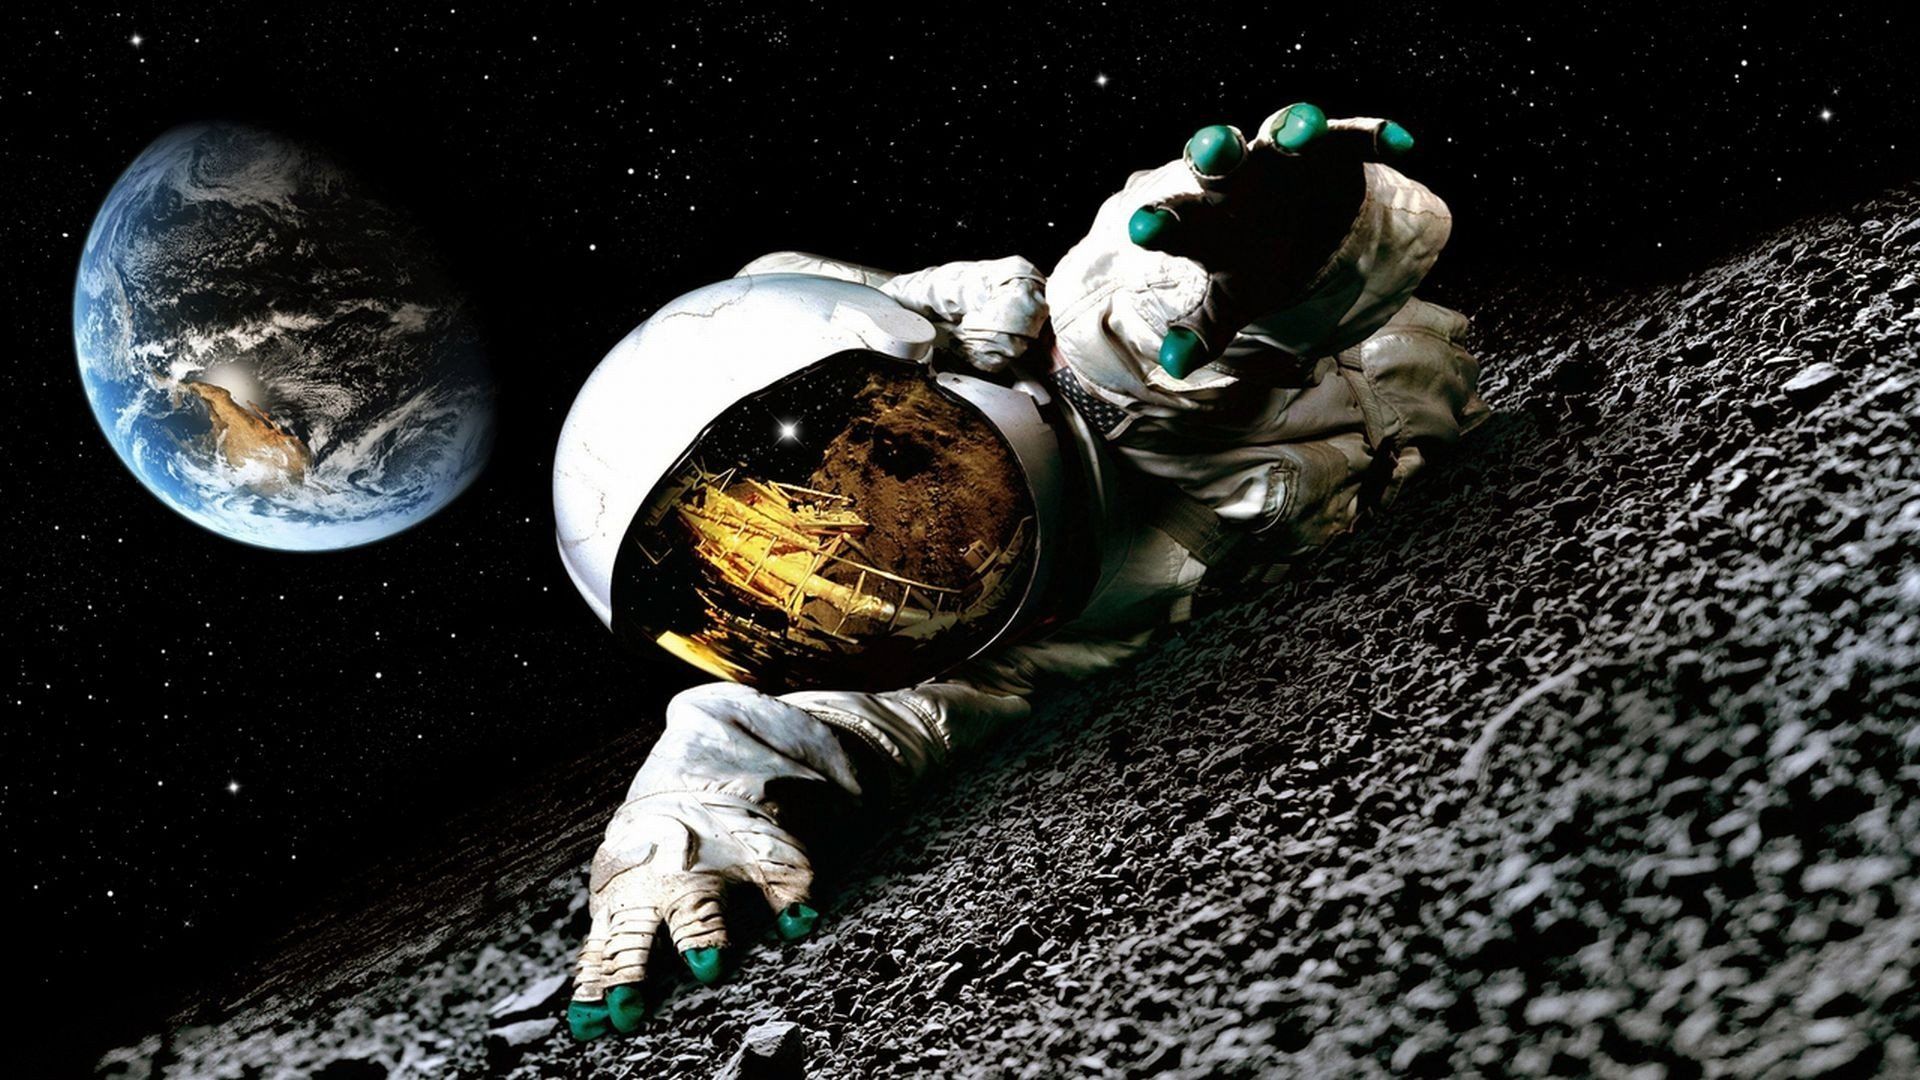 Outer space movies Moon Earth astronauts science fiction Apollo 18 (movie) wallpaperx1080